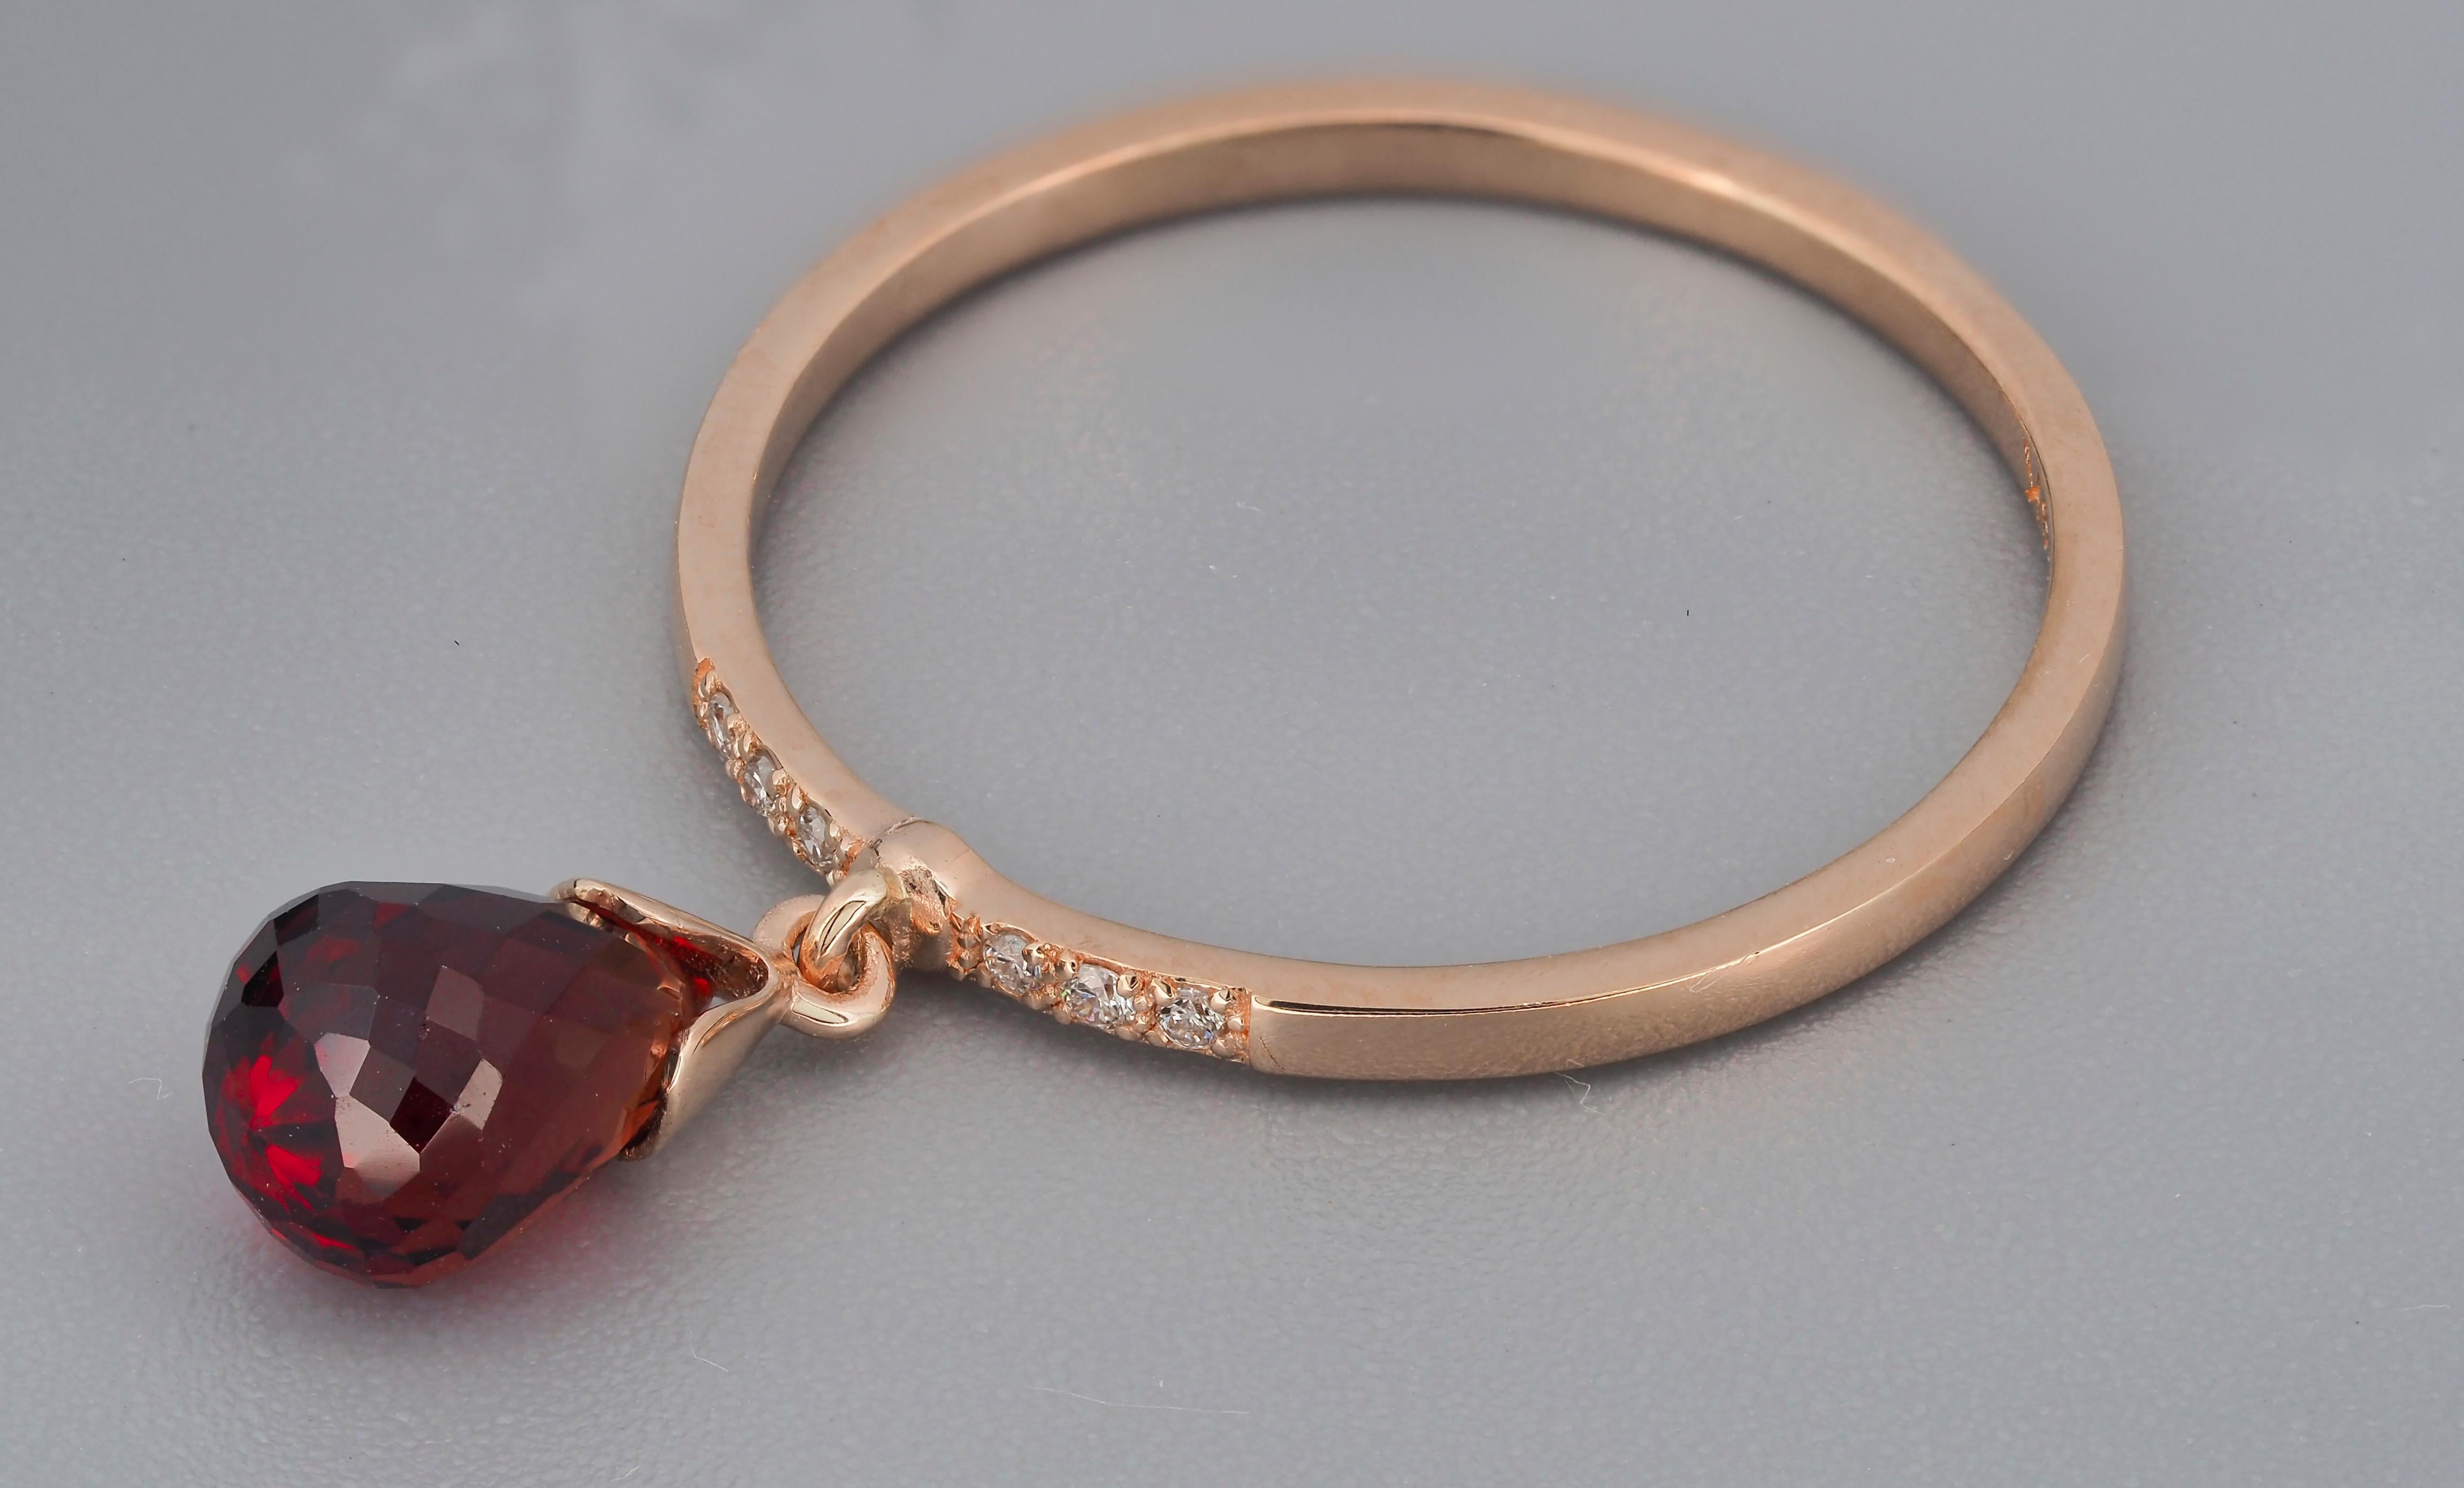 For Sale:  14k Gold Ring with Briolette Cut Garnet and Diamonds 5